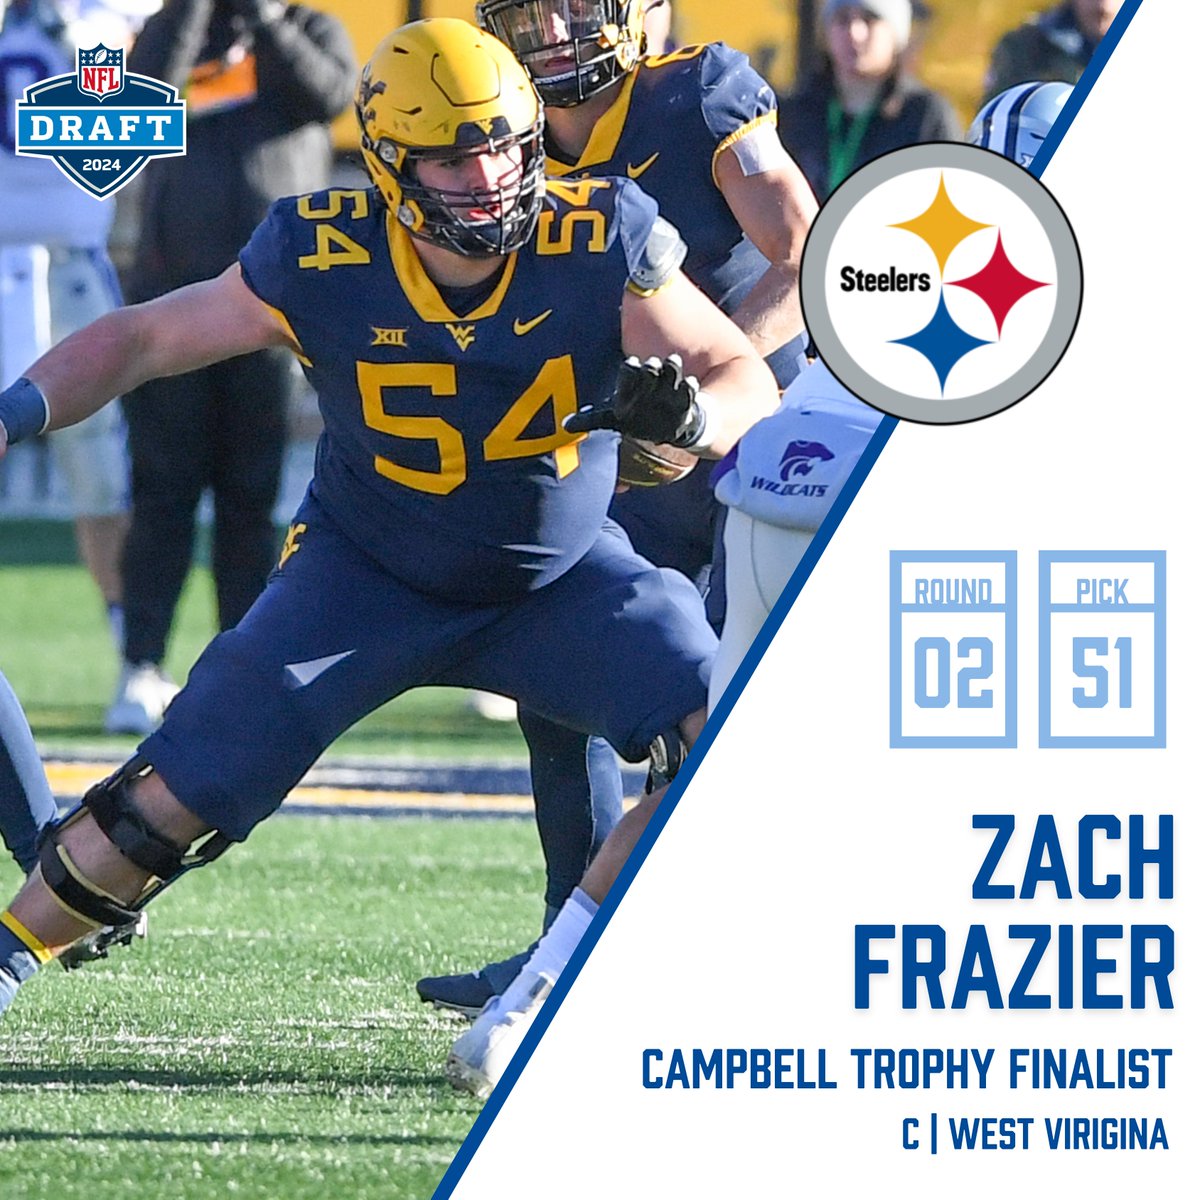 It's official: Zach's in black (and gold)! Congrats to 2023 #CampbellTrophy finalist Zach Frazier on being selected by the Steelers! #HereWeGo